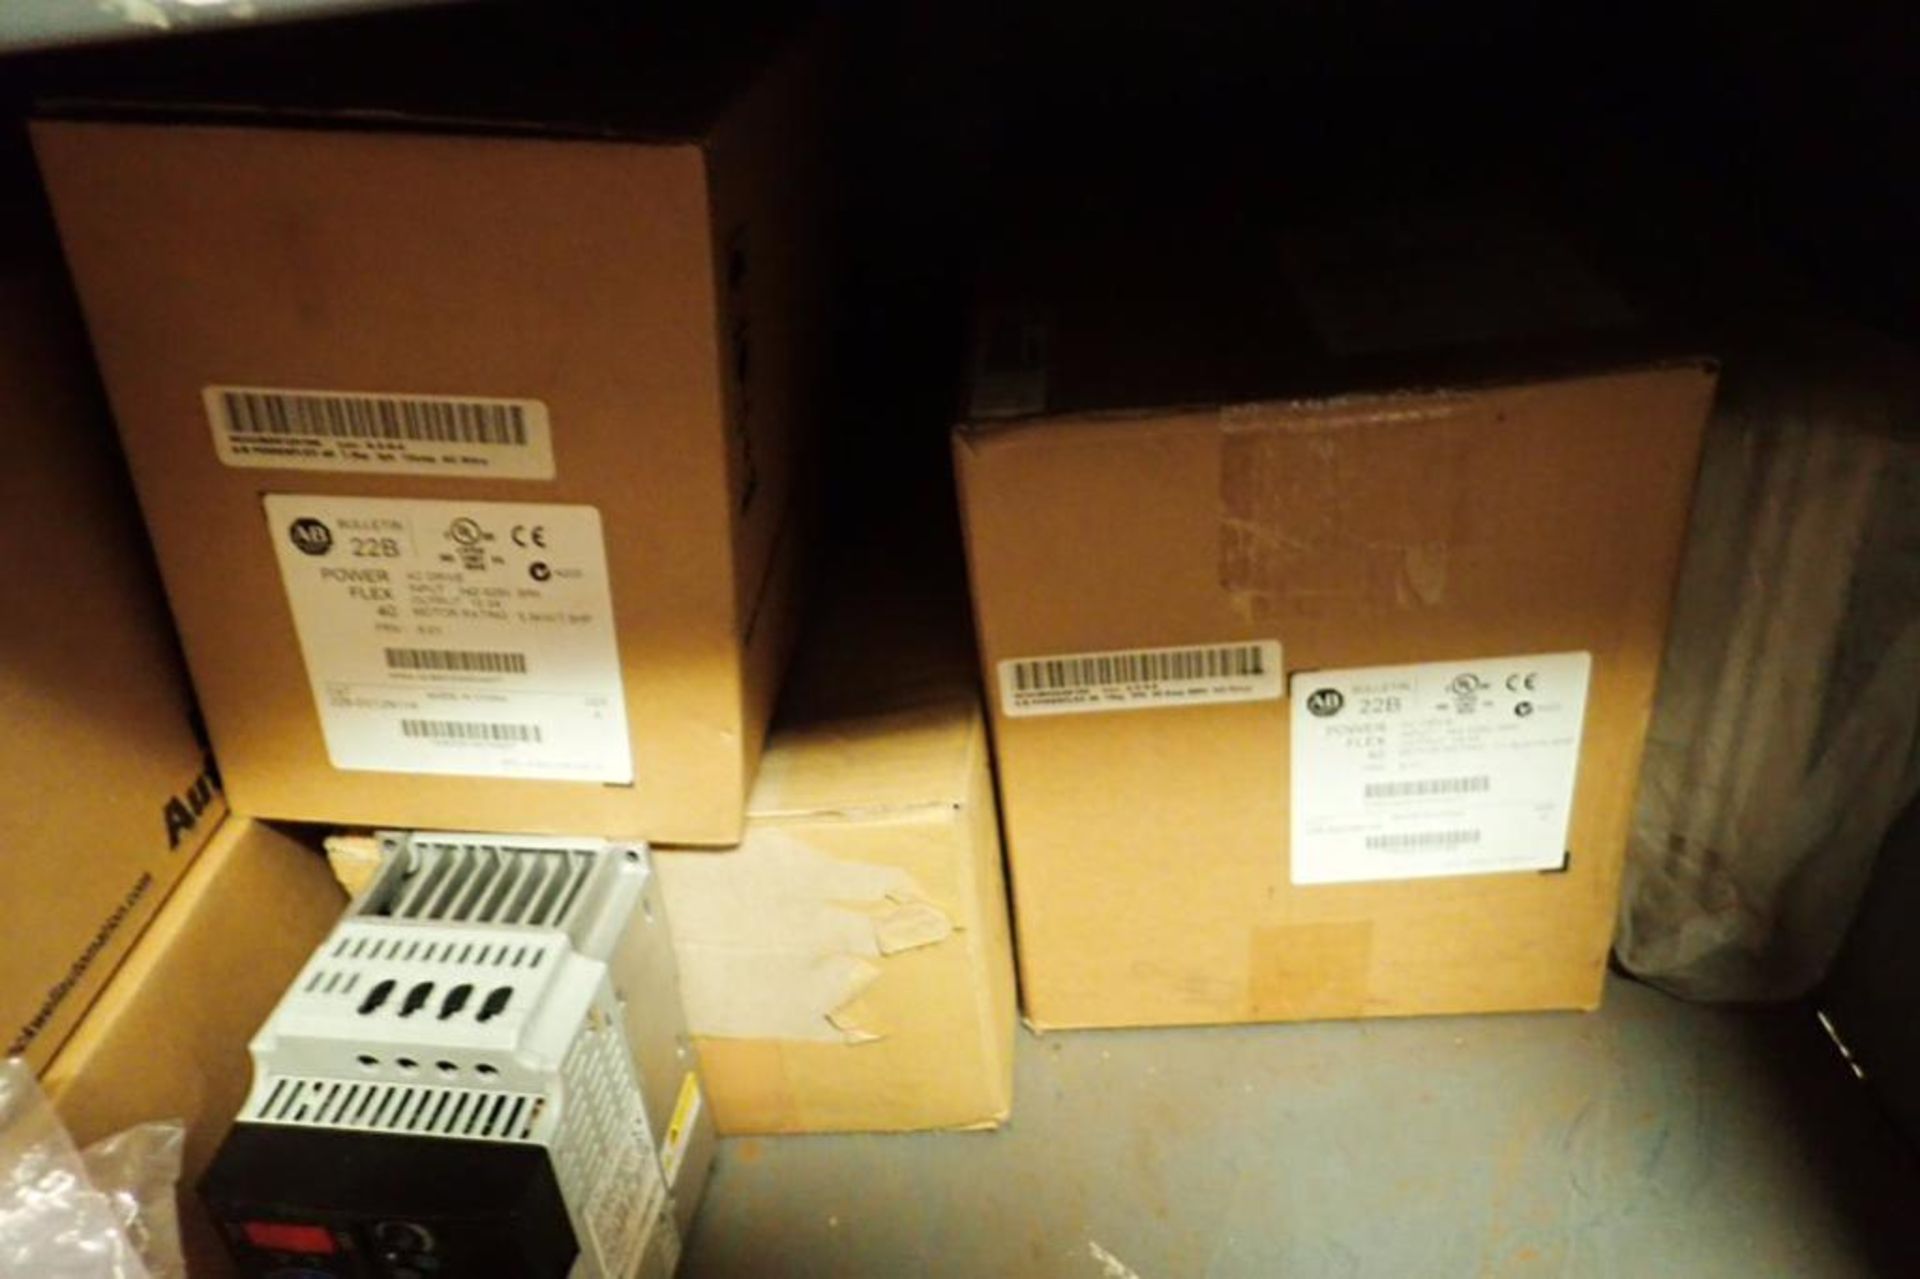 Contents only of 1 section of shelving, Allen Bradley vfds, power flex 4, 4m, 40, 525, Loma scale he - Image 25 of 43